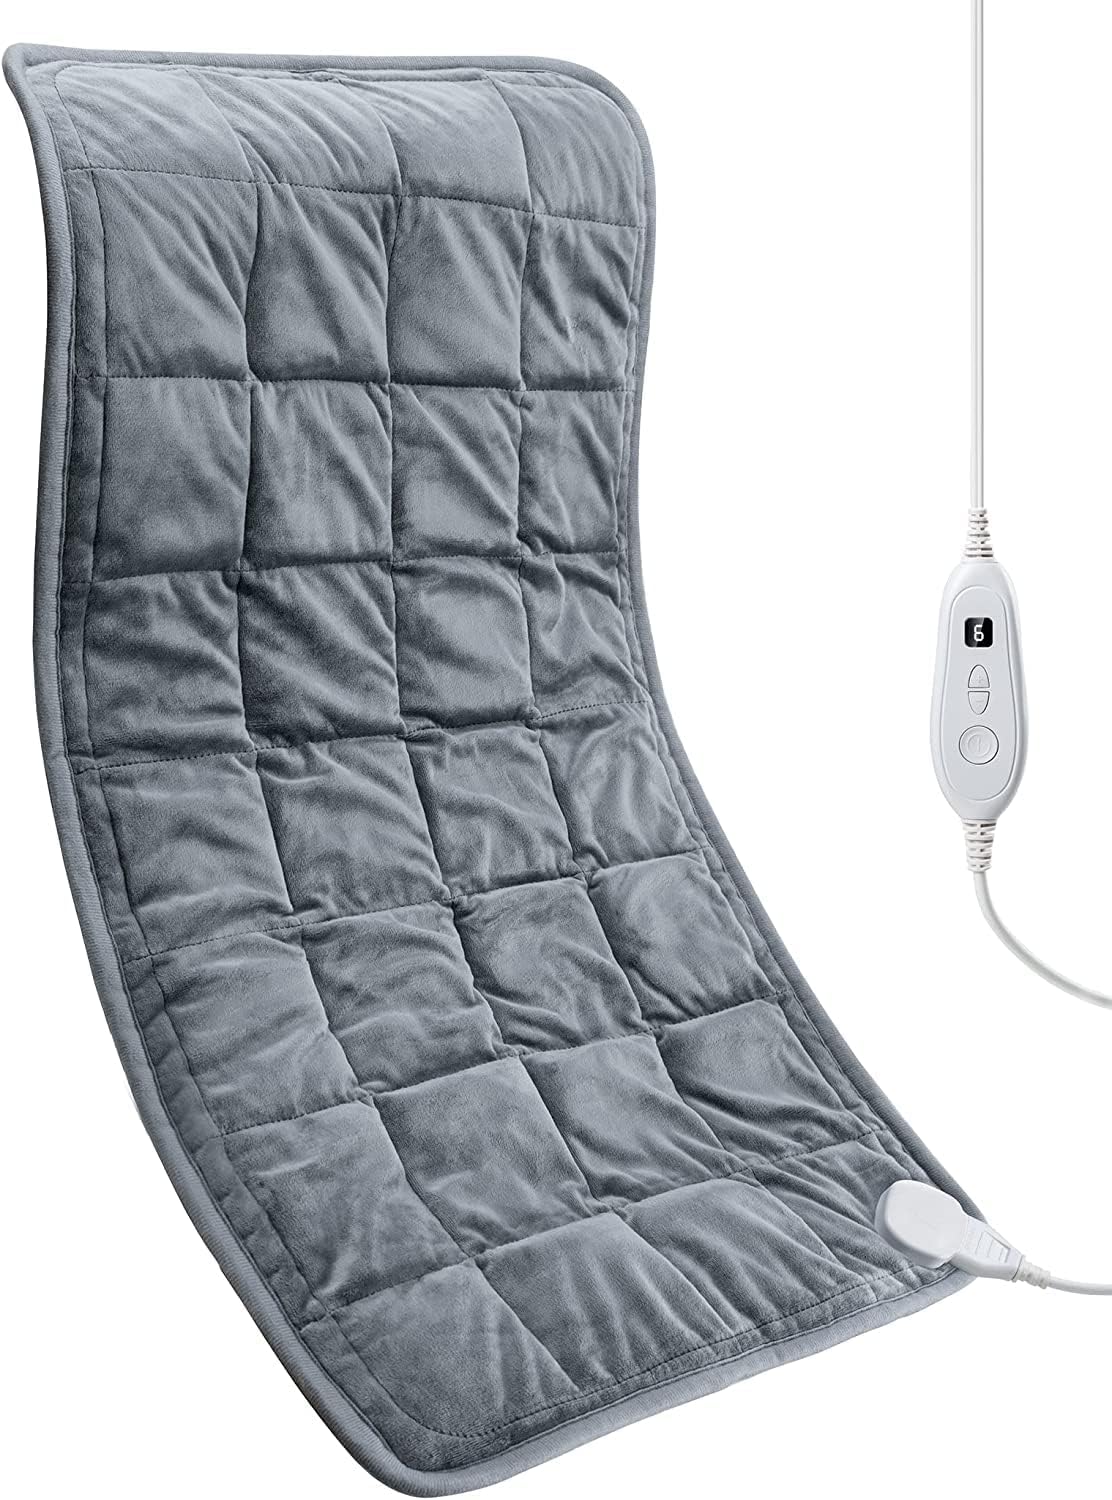 Weighted Heating Pad 17''x 33" XXXL Electric Heating Pad for Back Pain Relief, 5LBS